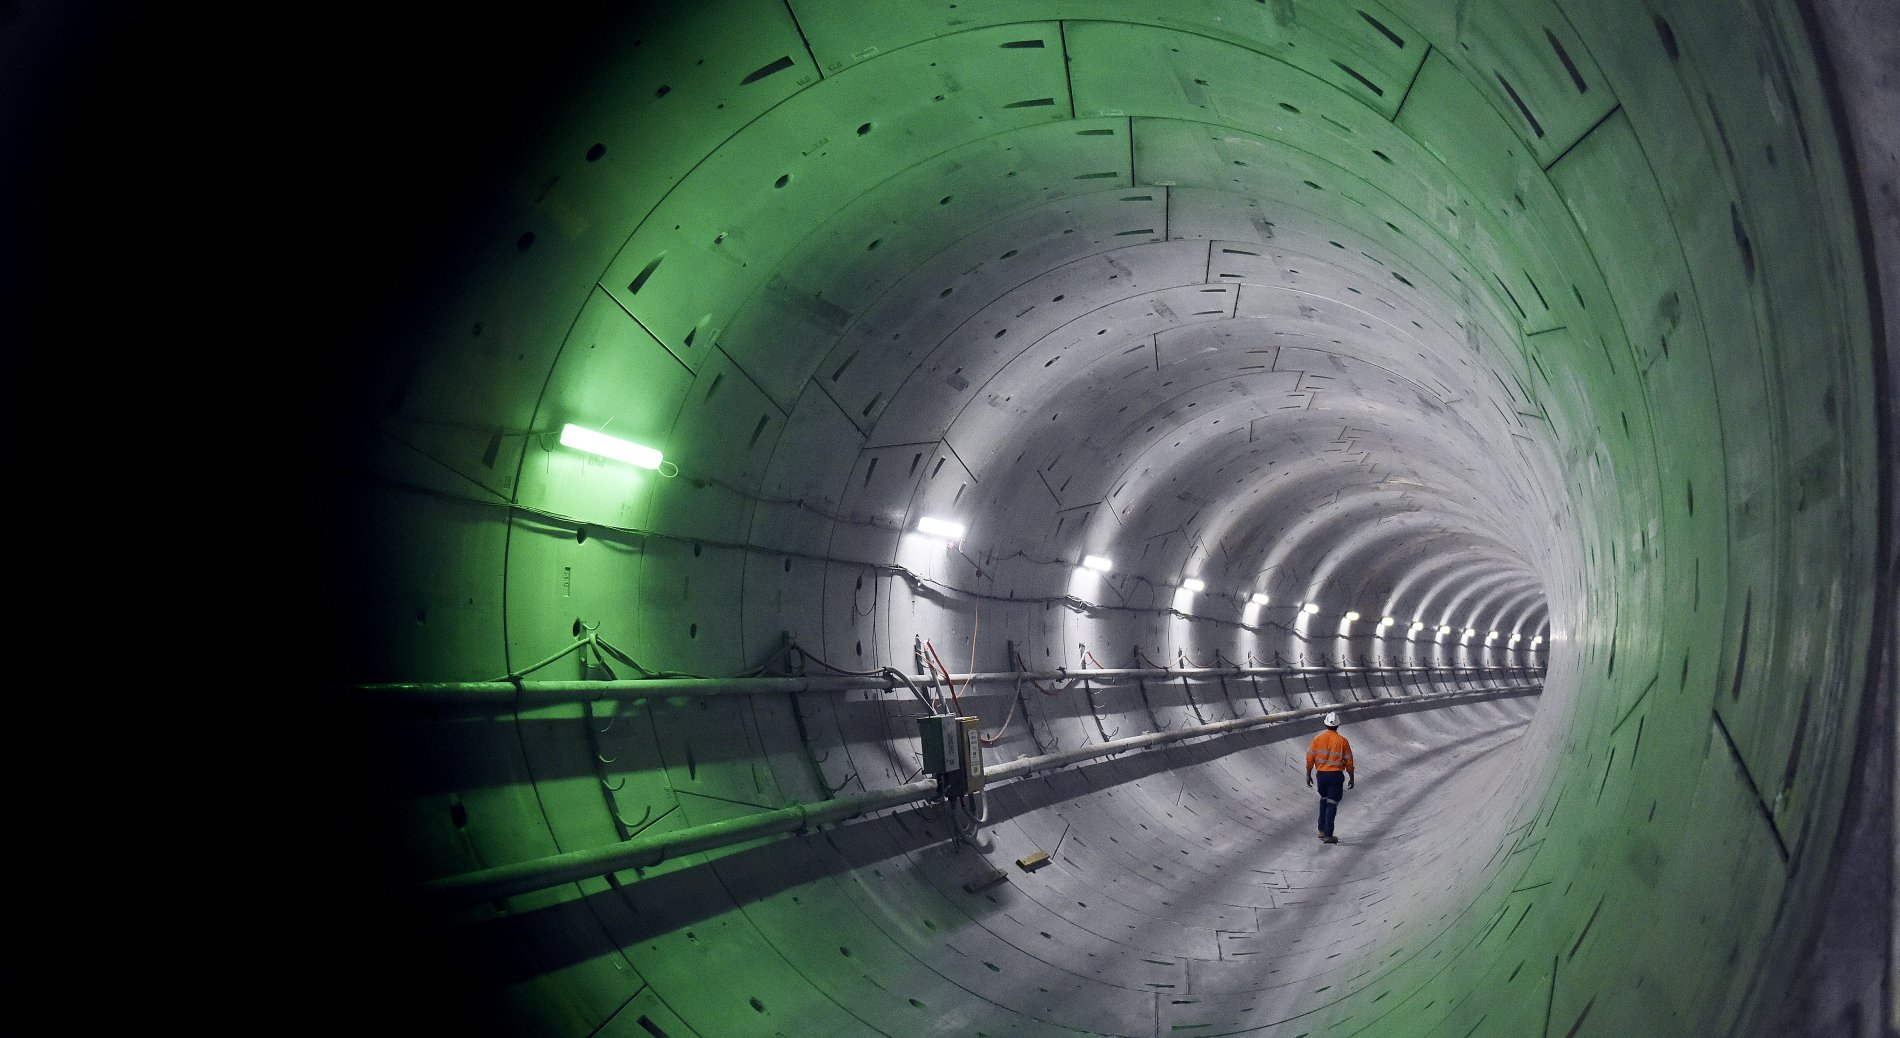 Global Tunnel and Metro Market to Grow at a CAGR Of XX.XX% During the Period 2017-2022